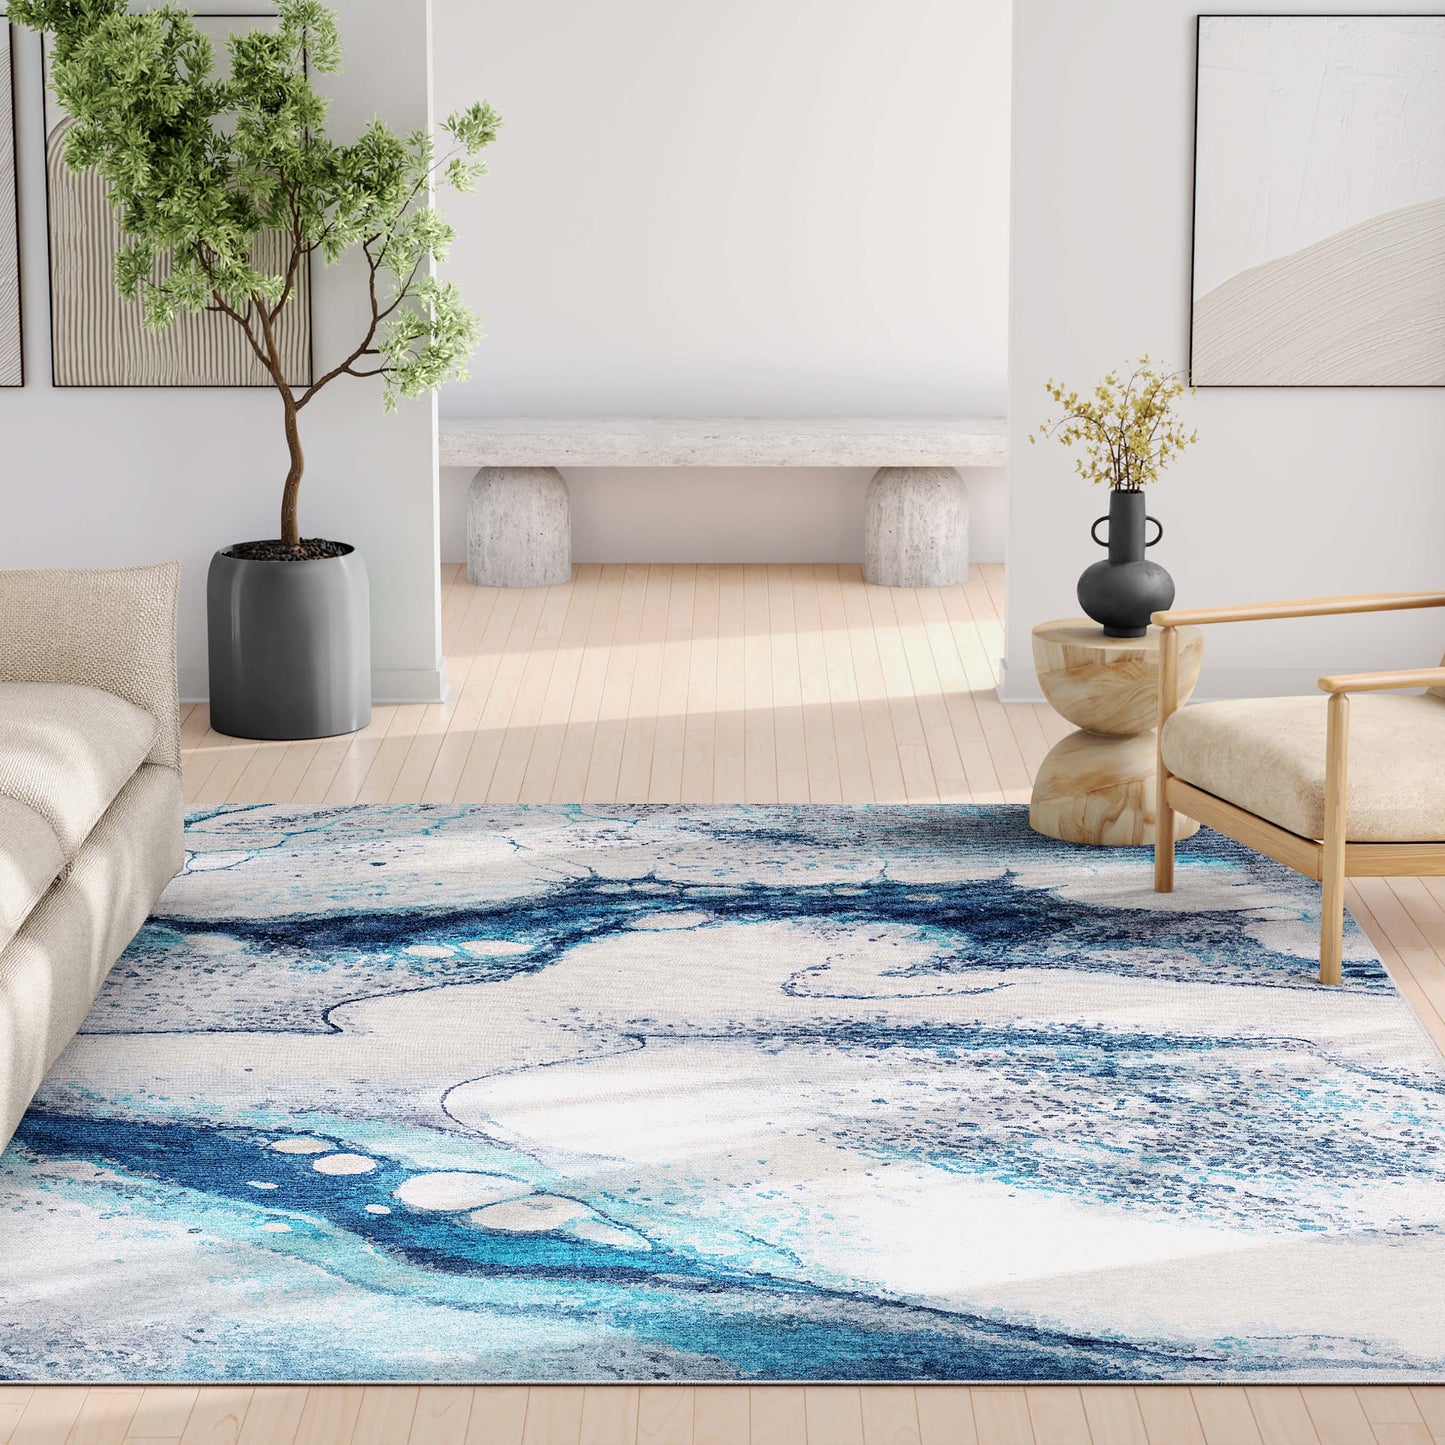 Abstract Tokyo Blue Rug W-AB-04A